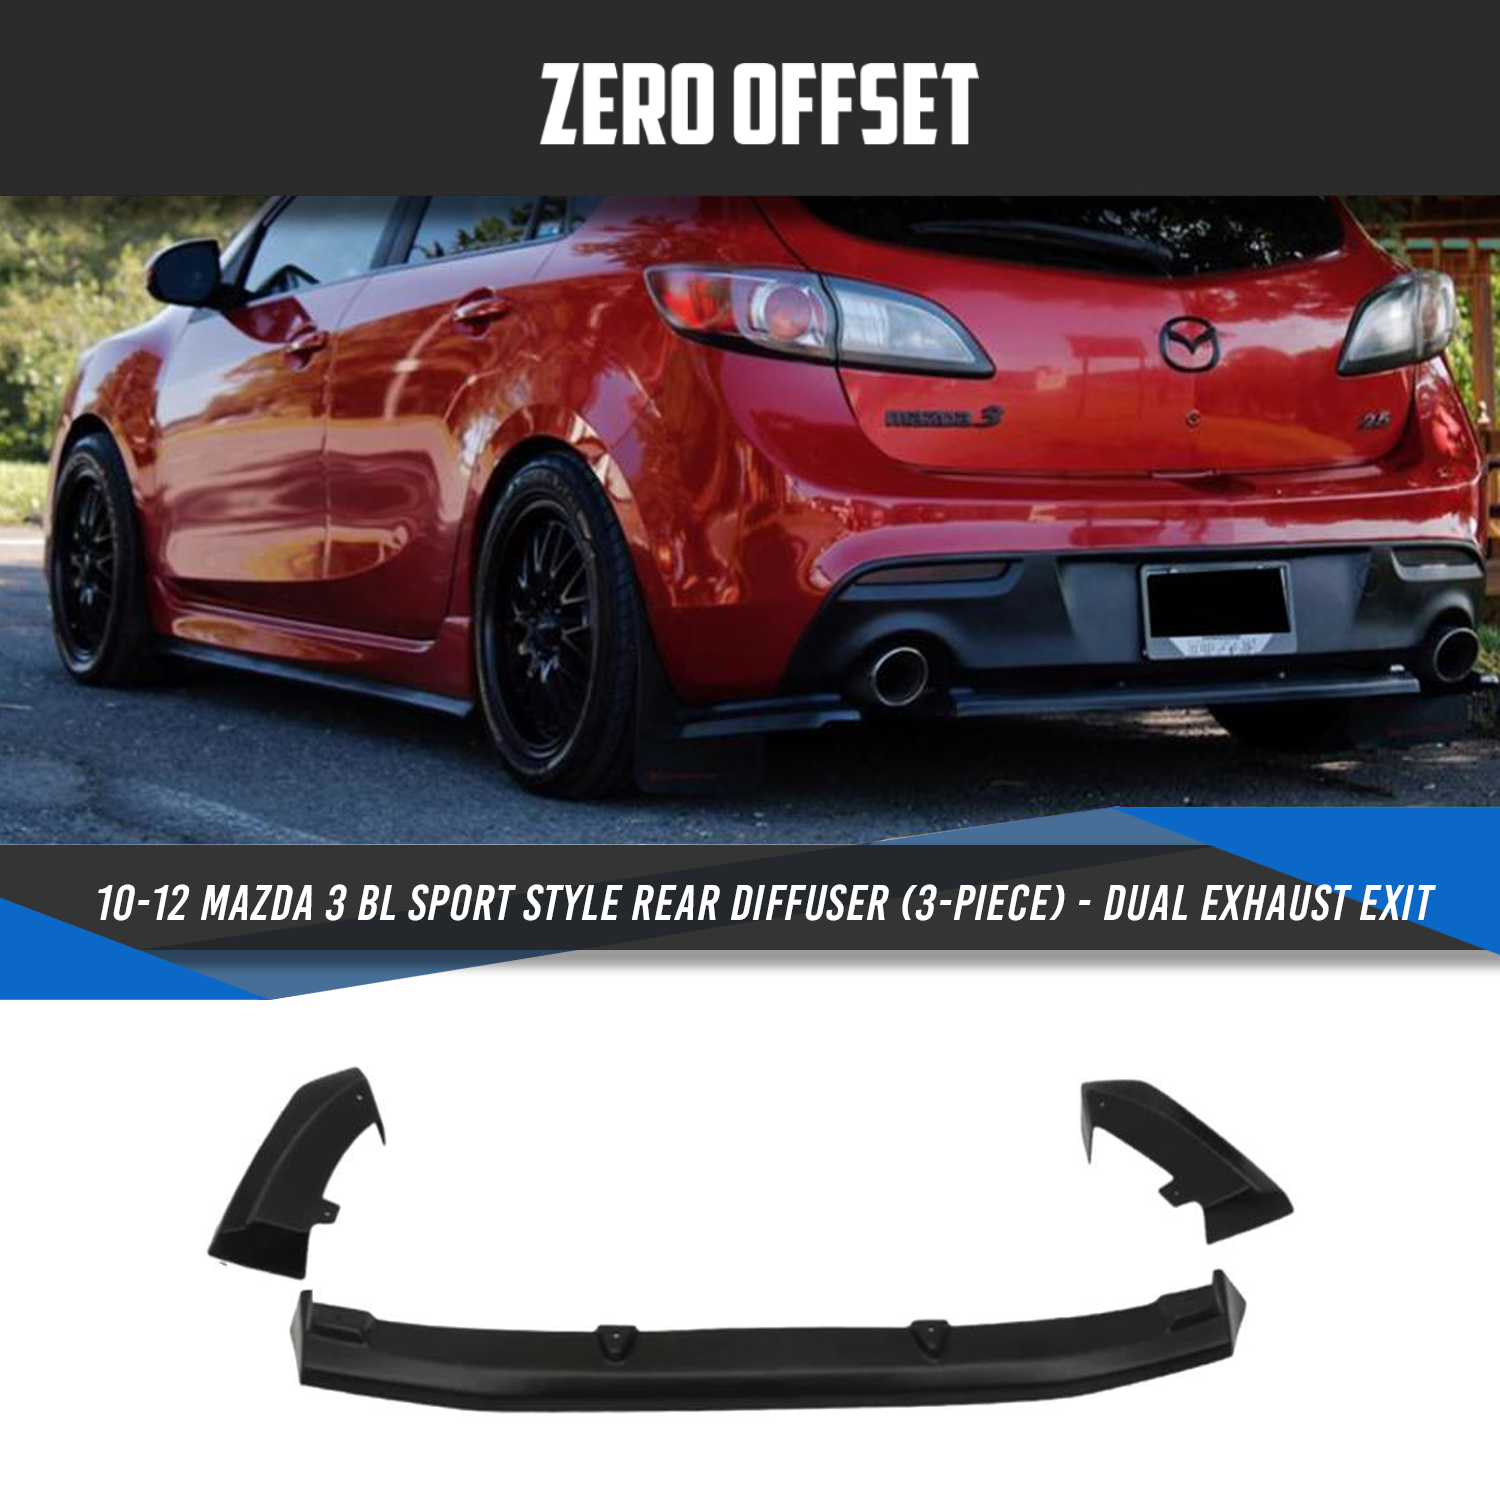 Zero Offset  Sport Style Rear Diffuser (3-Piece) - Dual Exhaust Exit for 10-13 Mazda 3 BL - MODE Auto Concepts